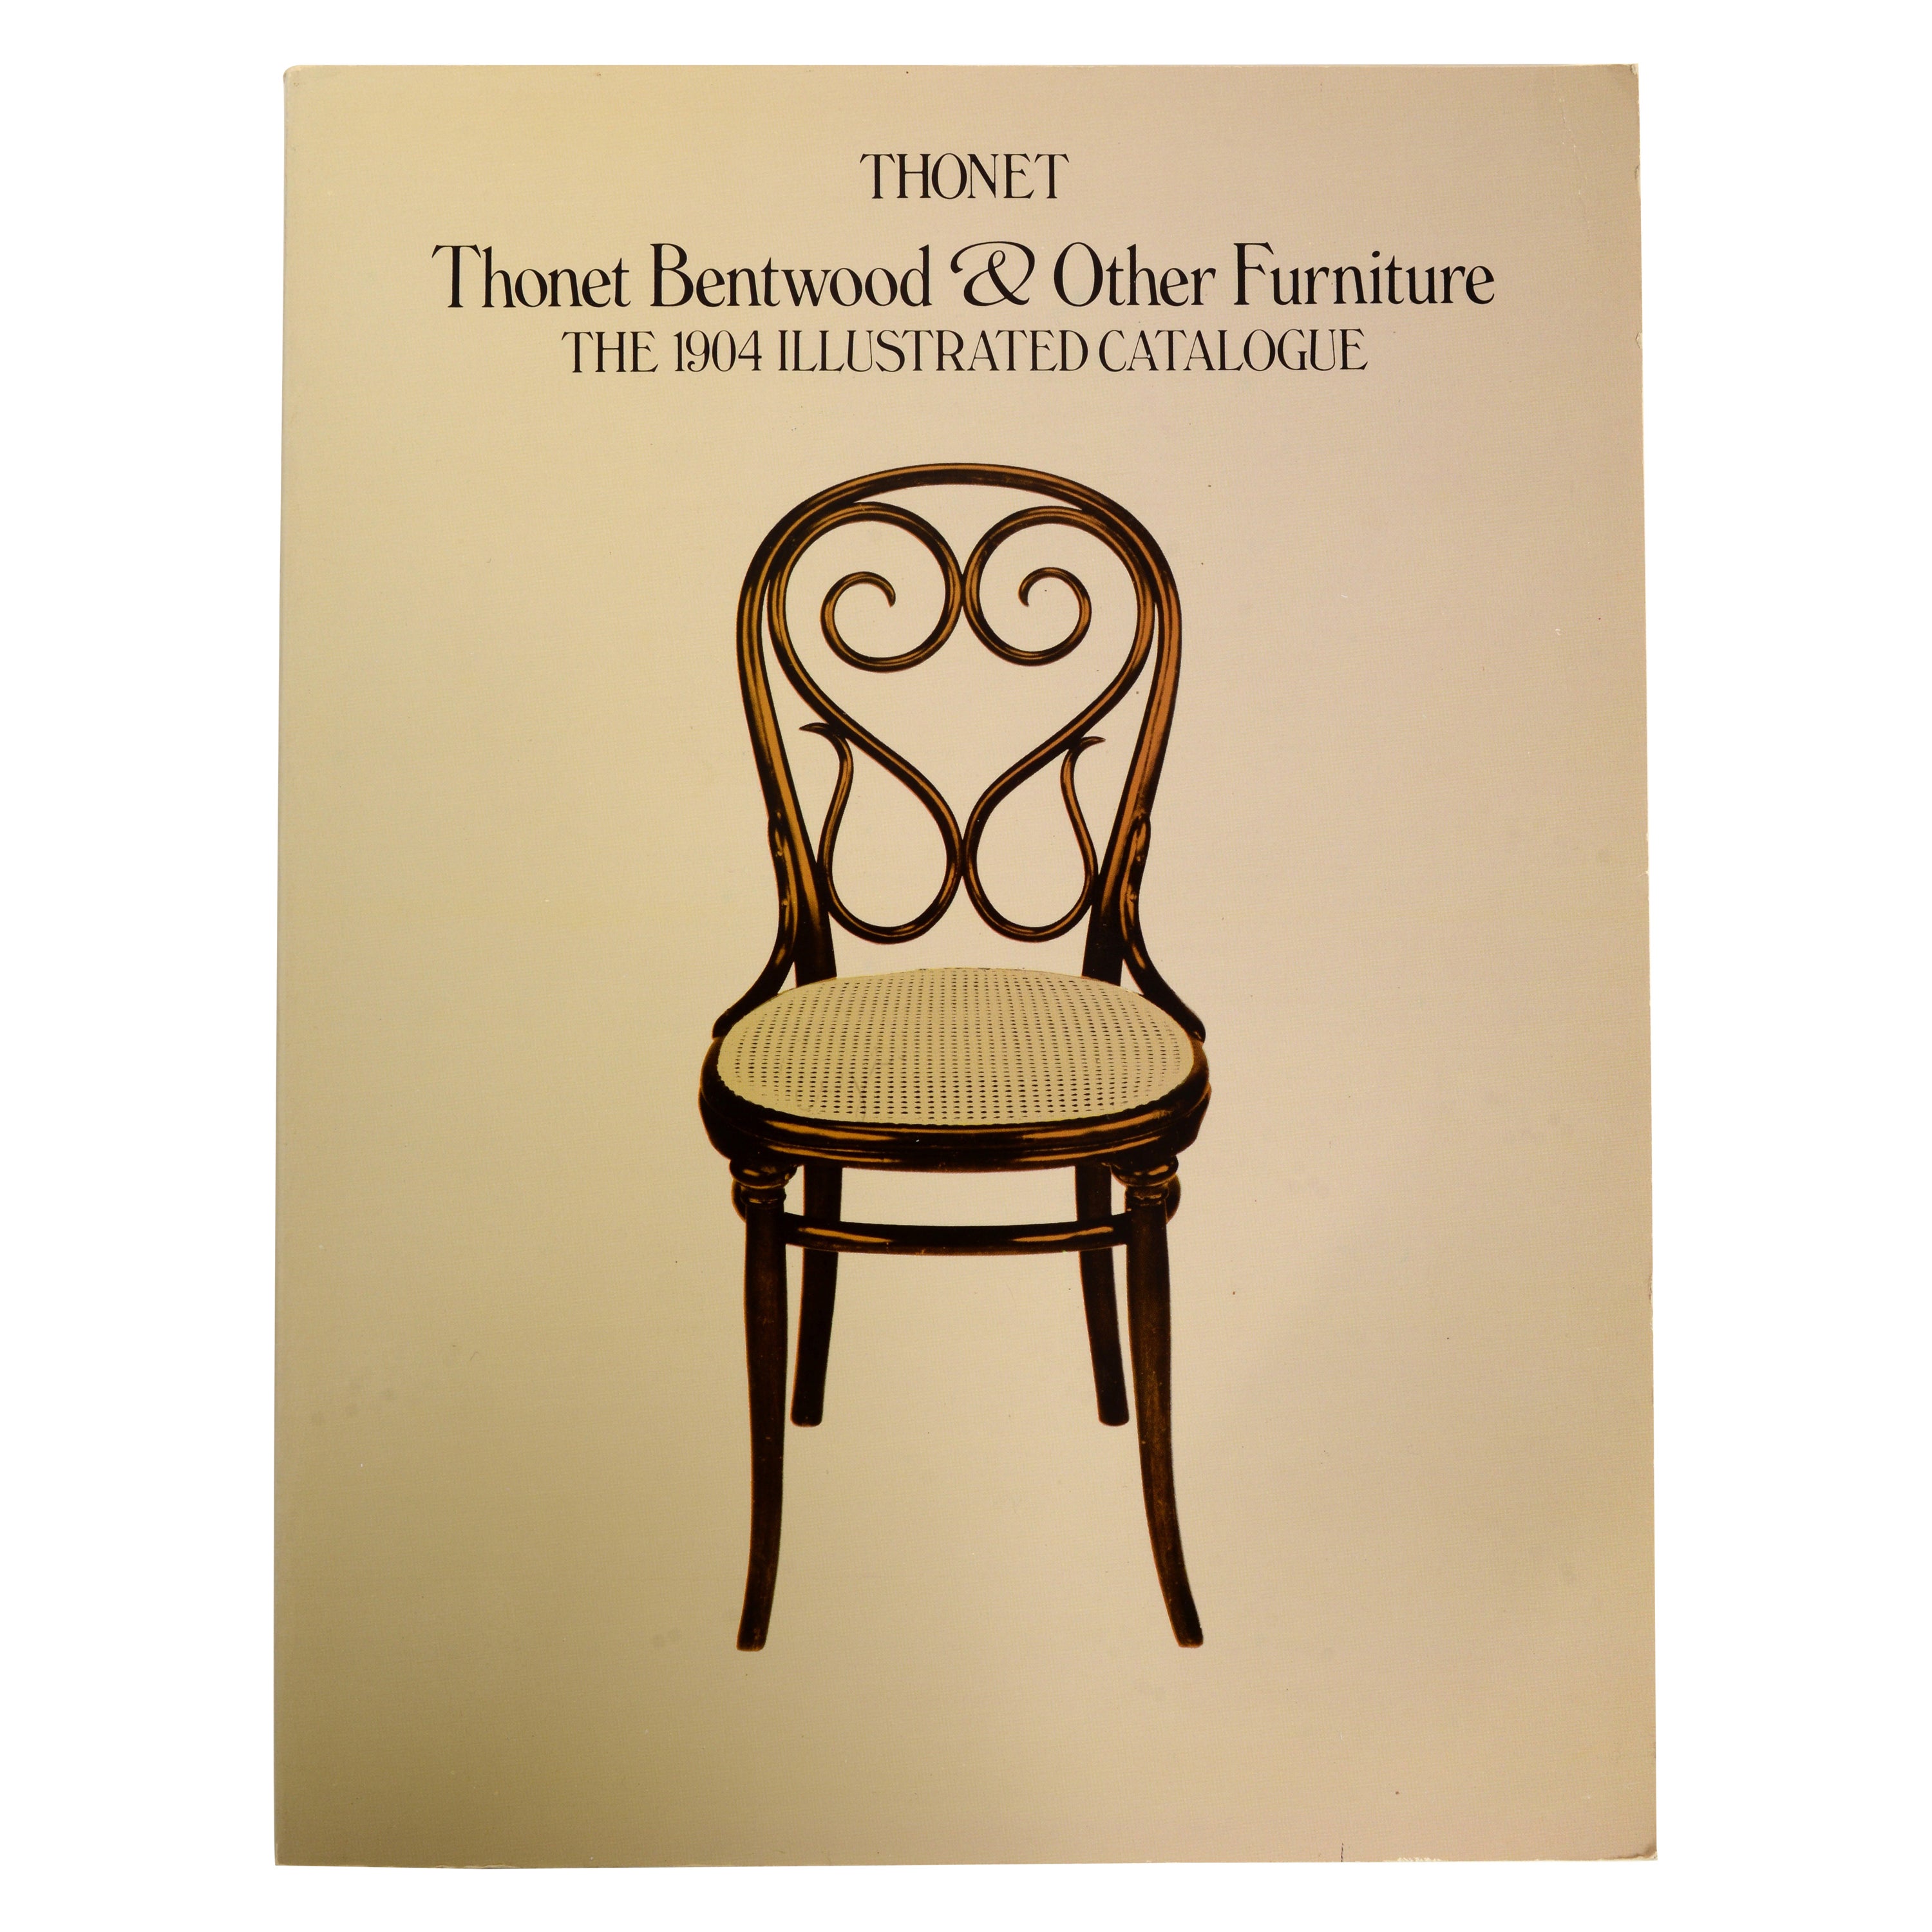 Thonet Bentwood & Other Furniture : The 1904 Illustrated Catalogue (en anglais) en vente